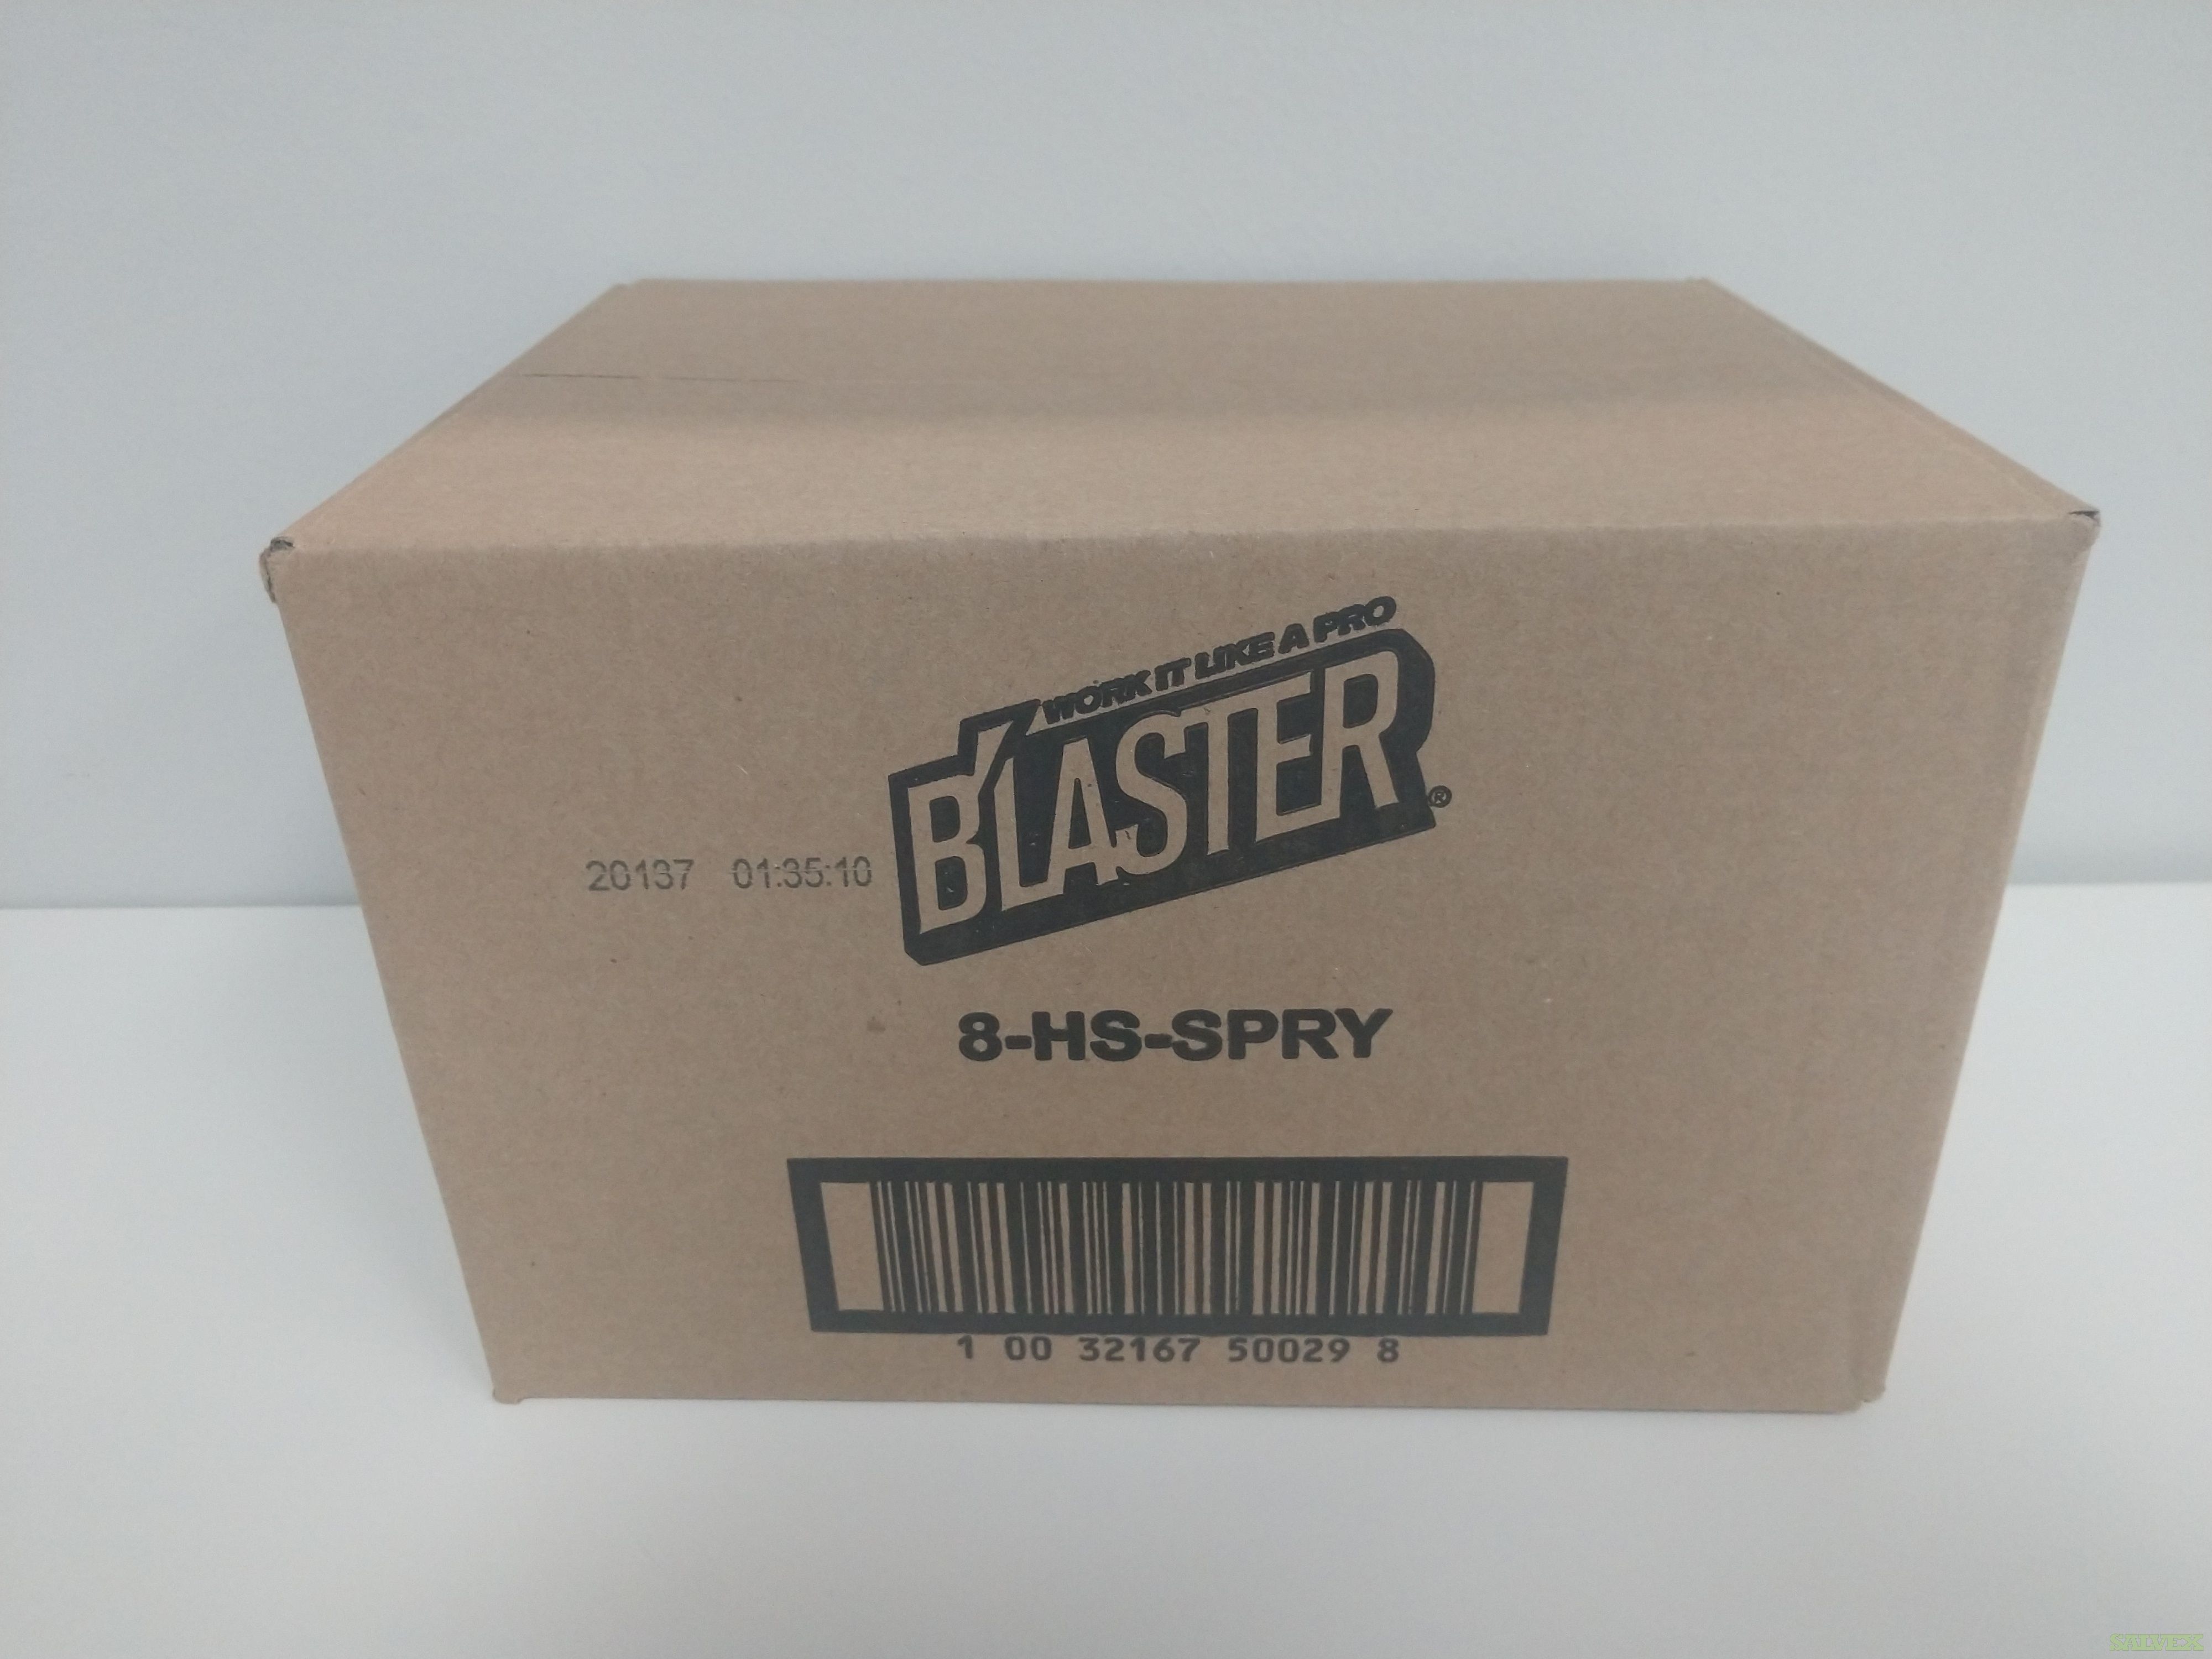 B'laster 8-HS Spray Hand Sanitizer (69,828 Cans)